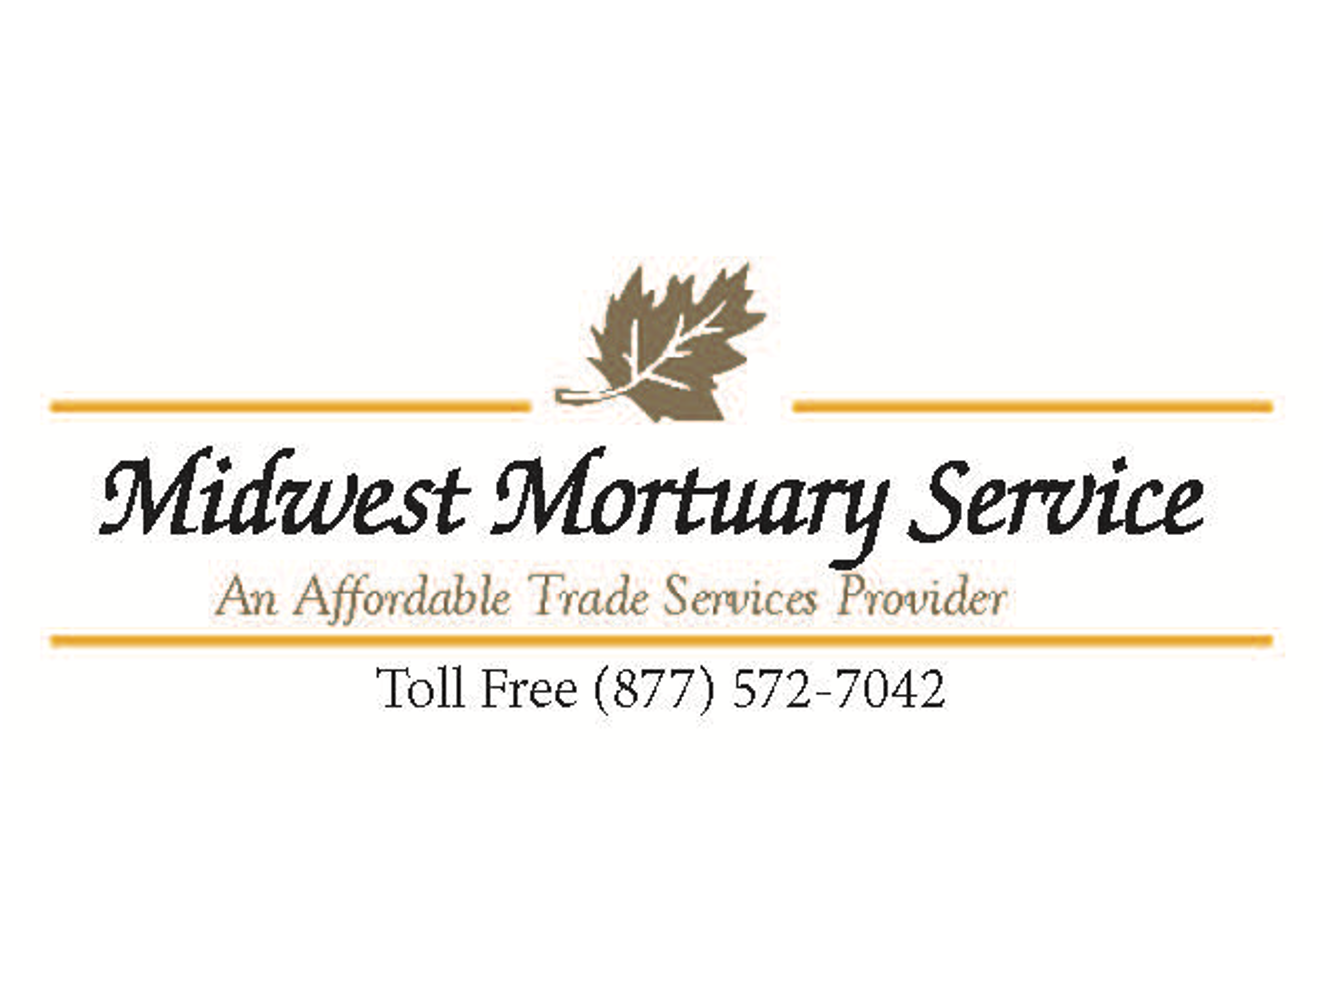 Midwest Mortuary Services